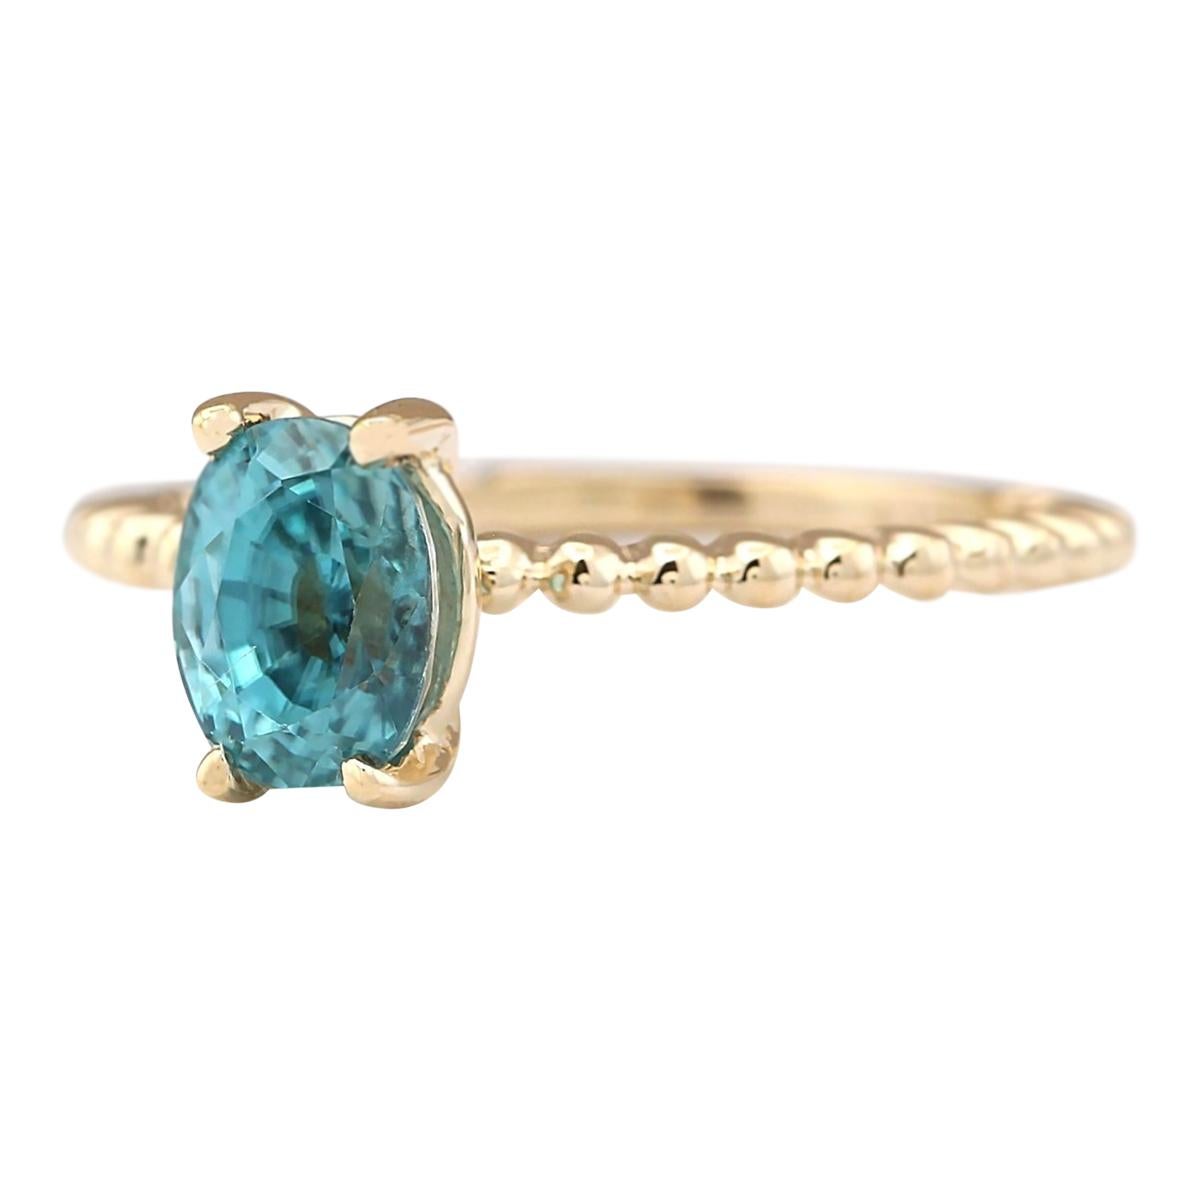 Stamped: 14K Yellow Gold
Total Ring Weight: 2.0 Grams
Total Natural Zircon Weight is 1.80 Carat
Color: Blue
Face Measures: 7.00x5.00 mm
Sku: [703275W]